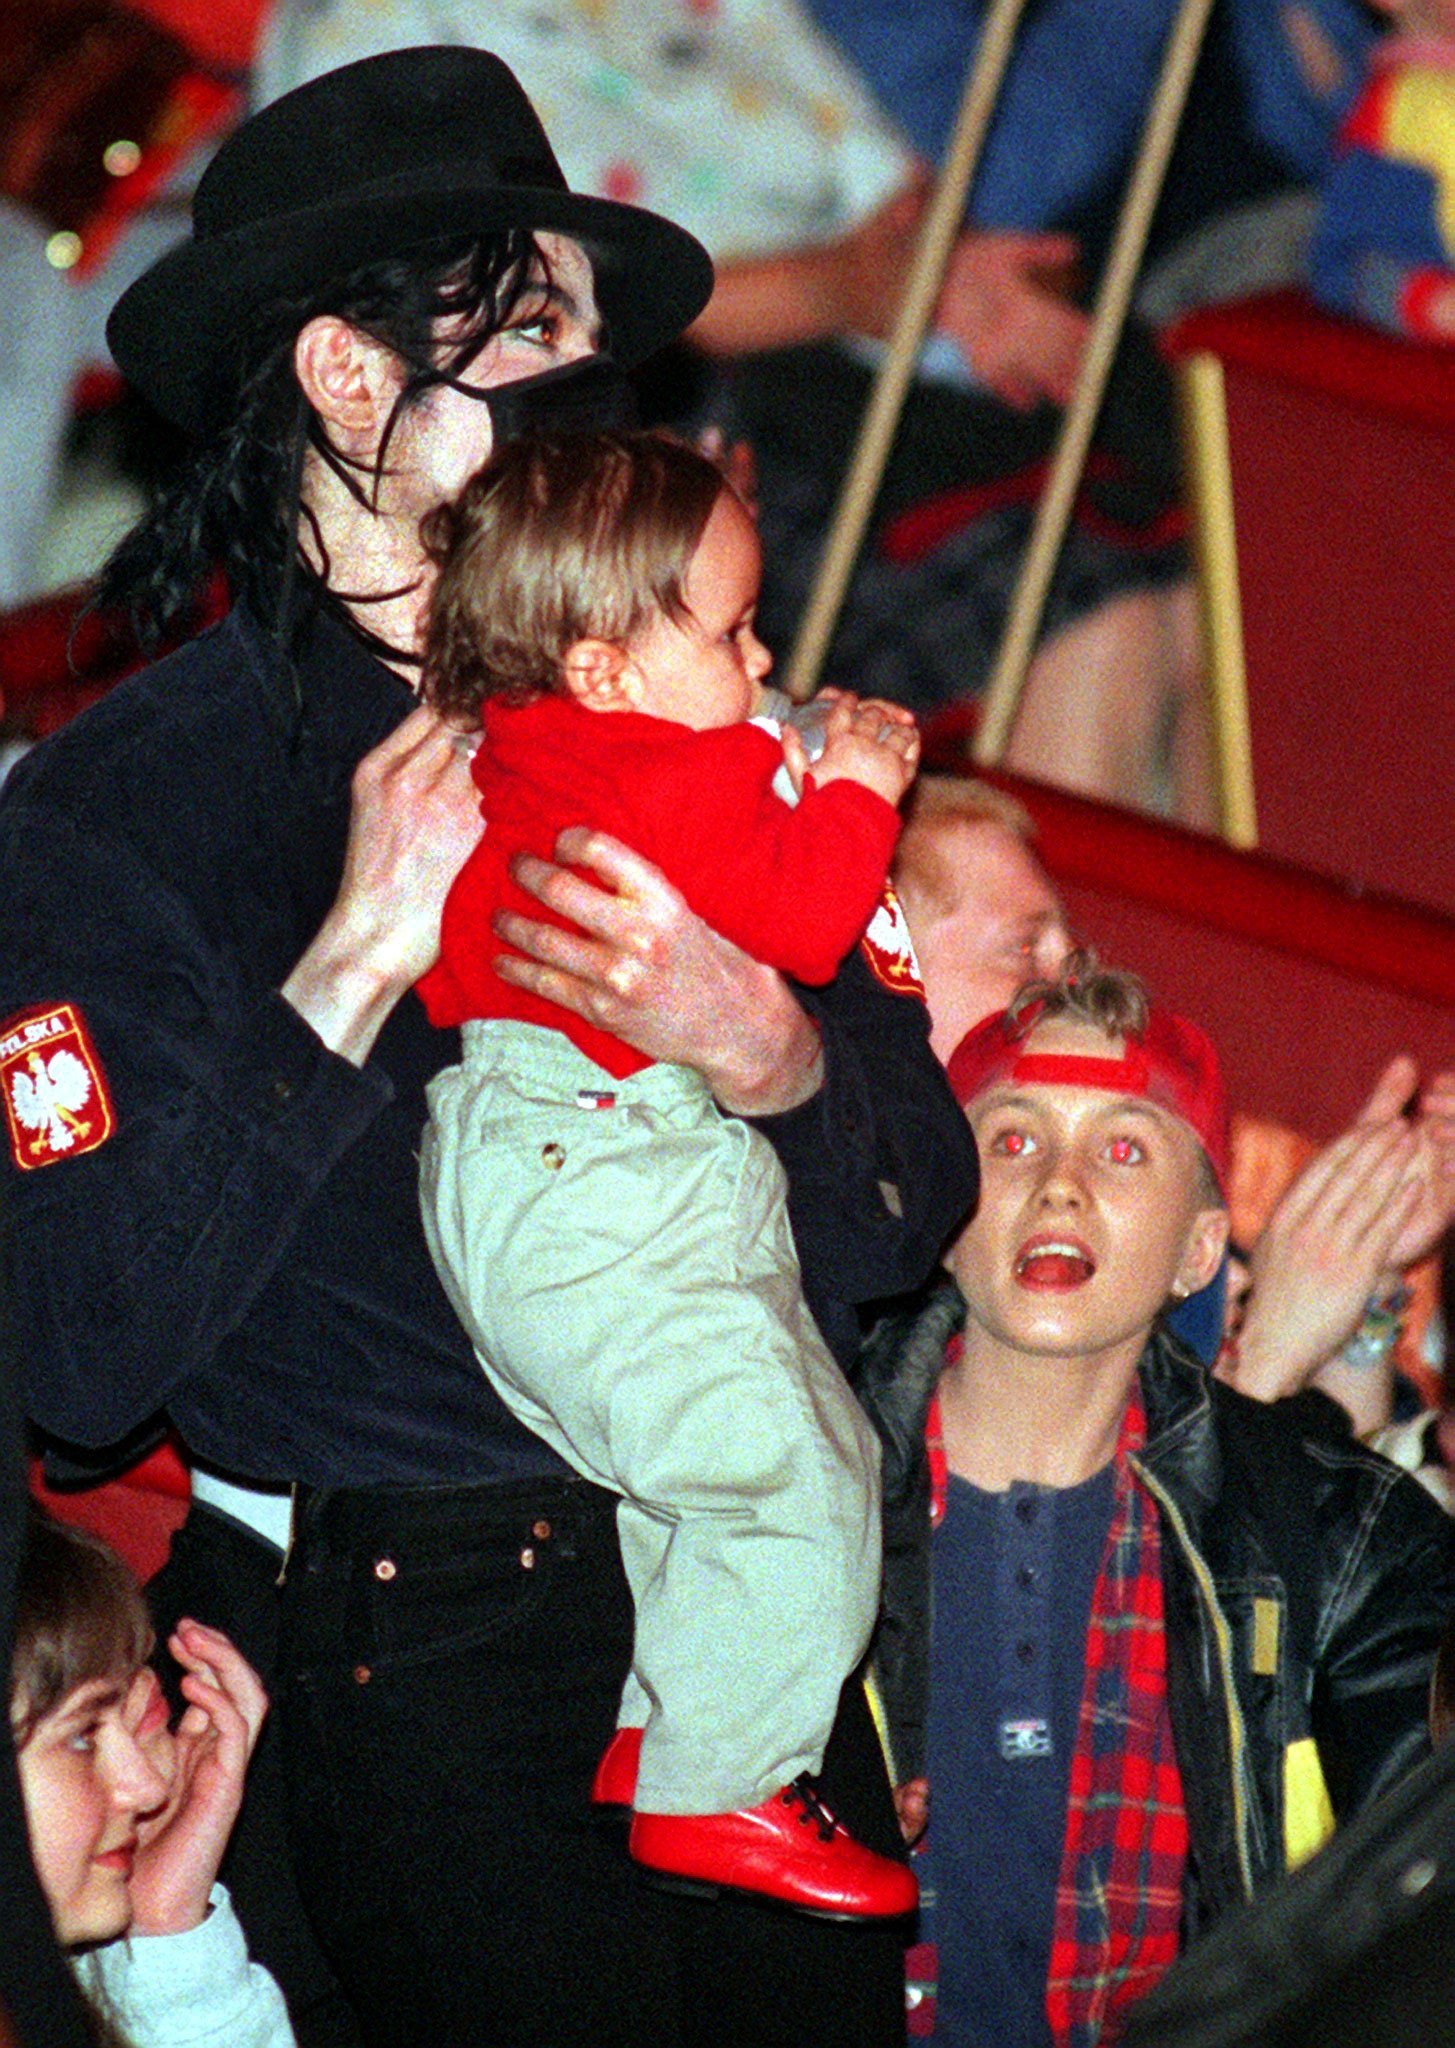 Michael Jackson with his daughter Paris Jackson in Germany, München in 1998 | Source: Getty Images